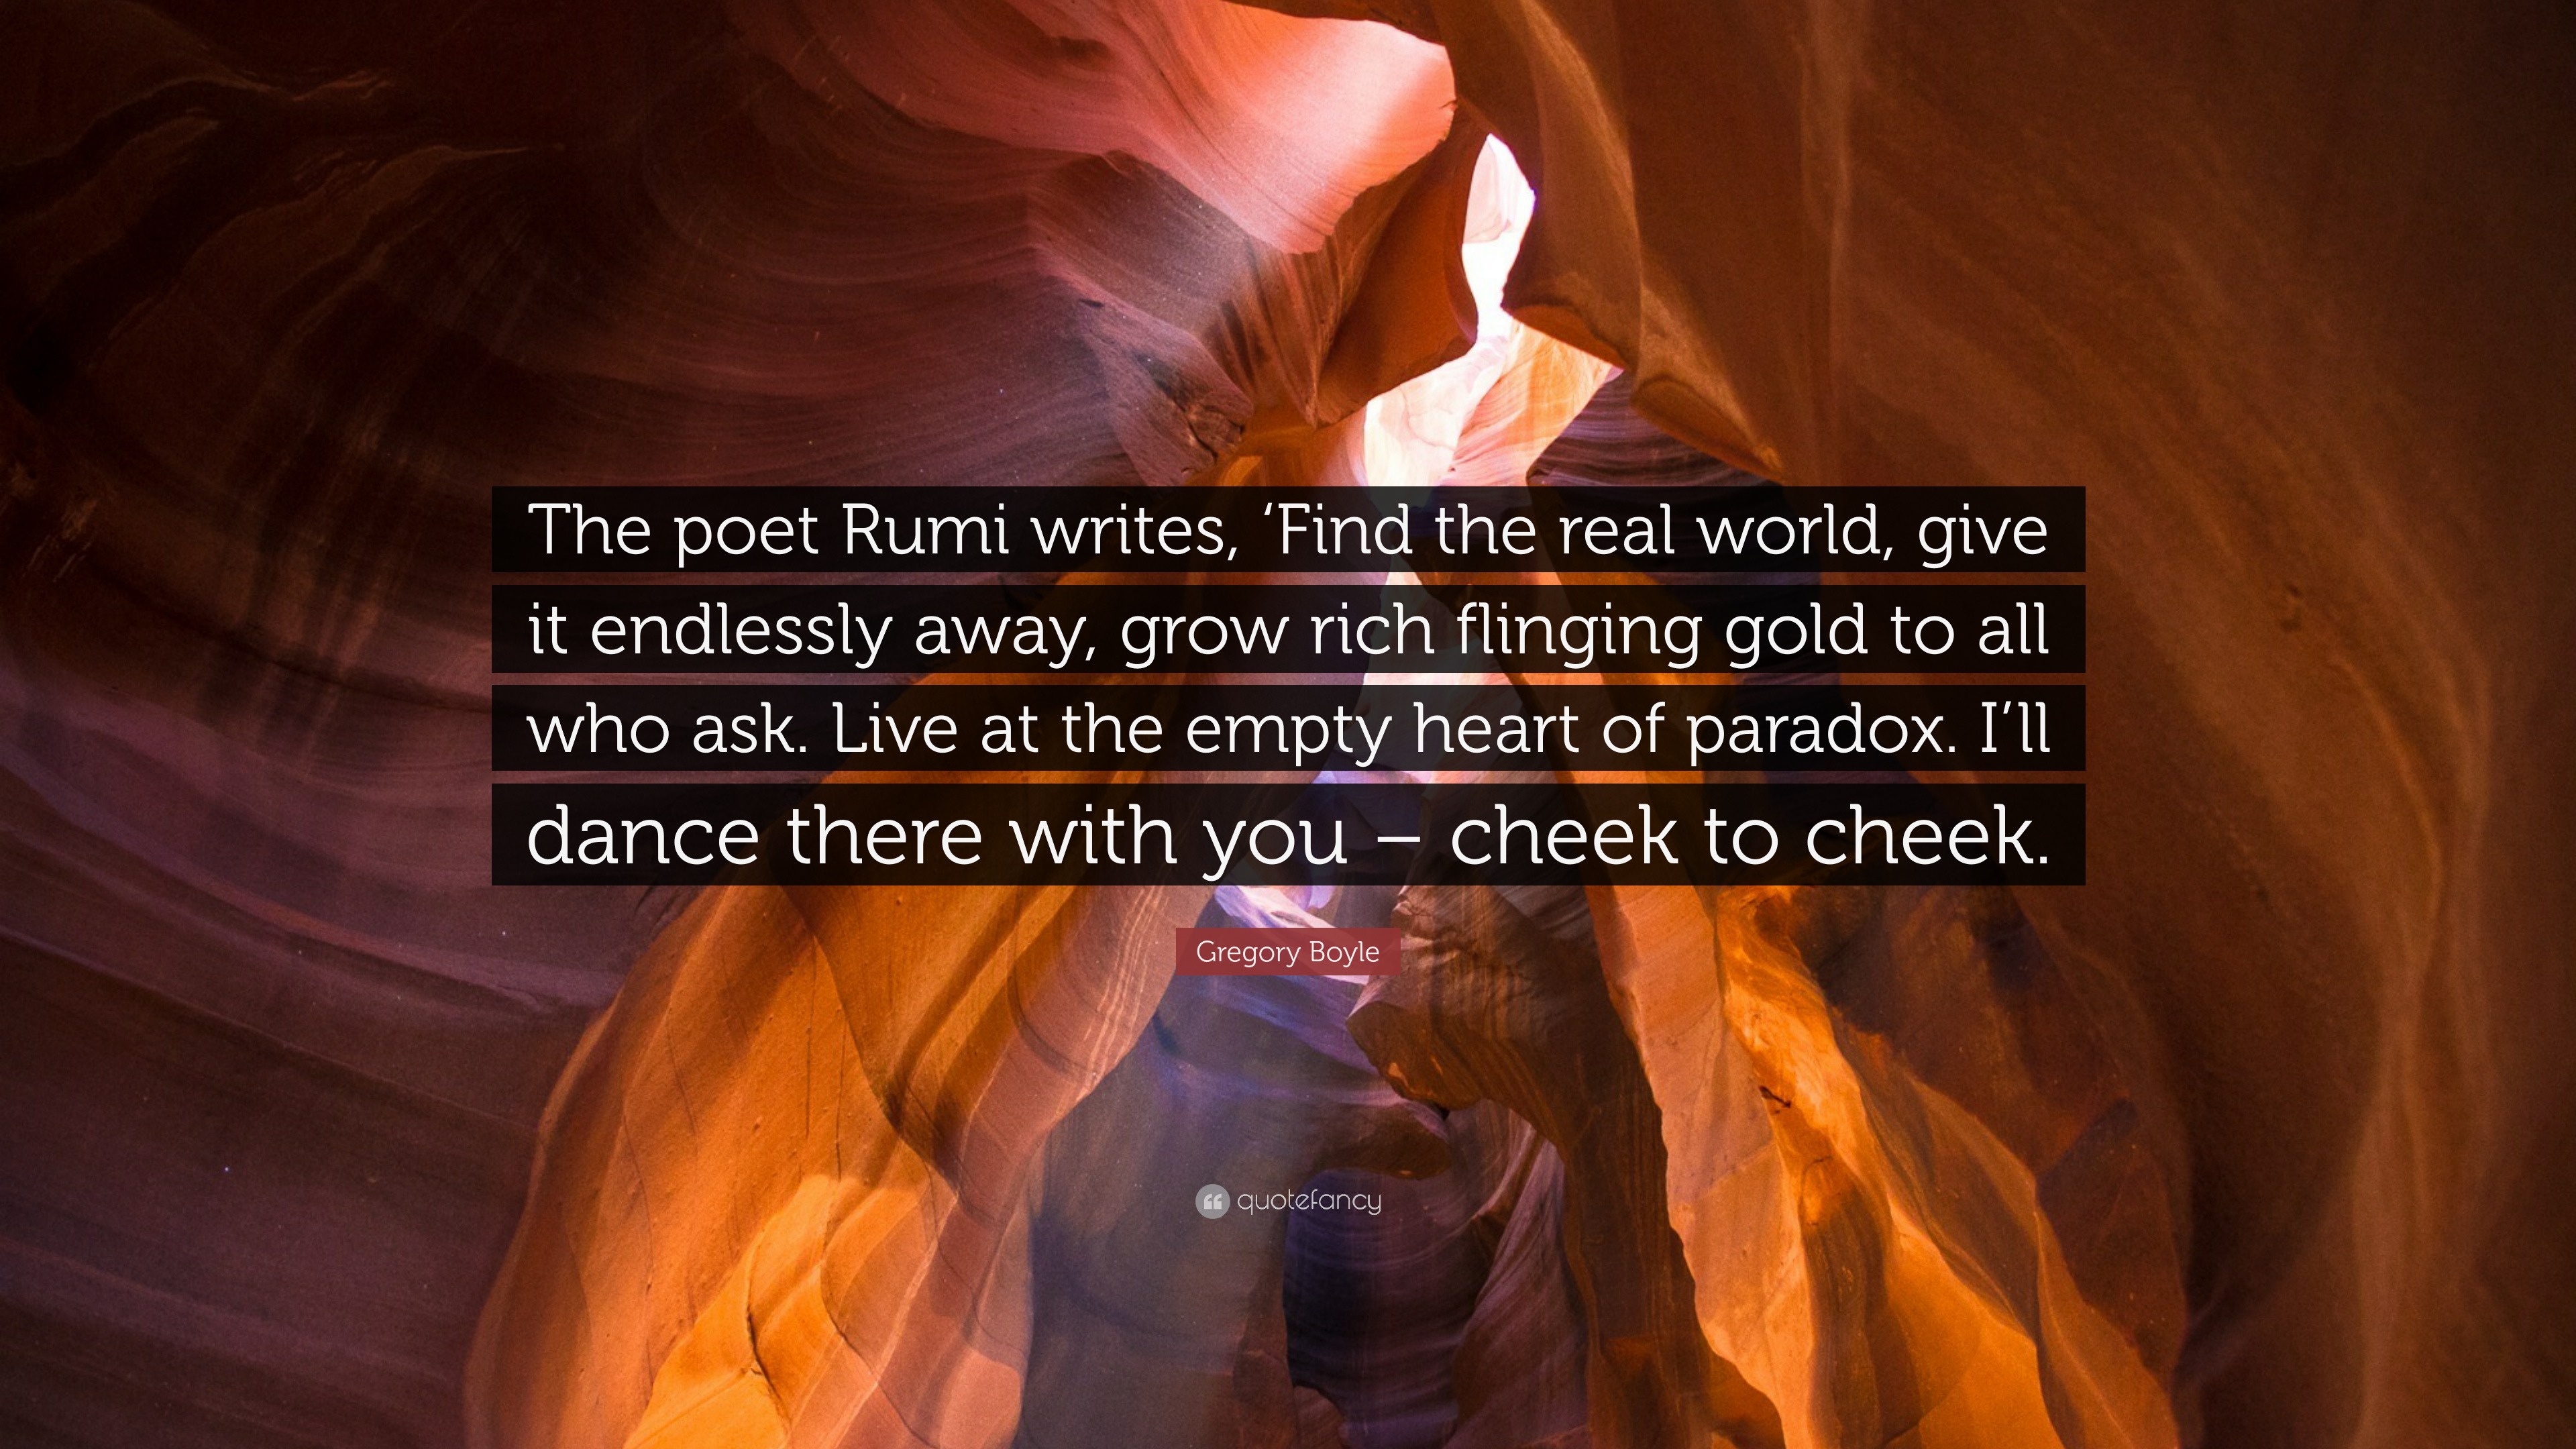 Gregory Boyle Quote: “The poet Rumi writes, ‘Find the real world, give